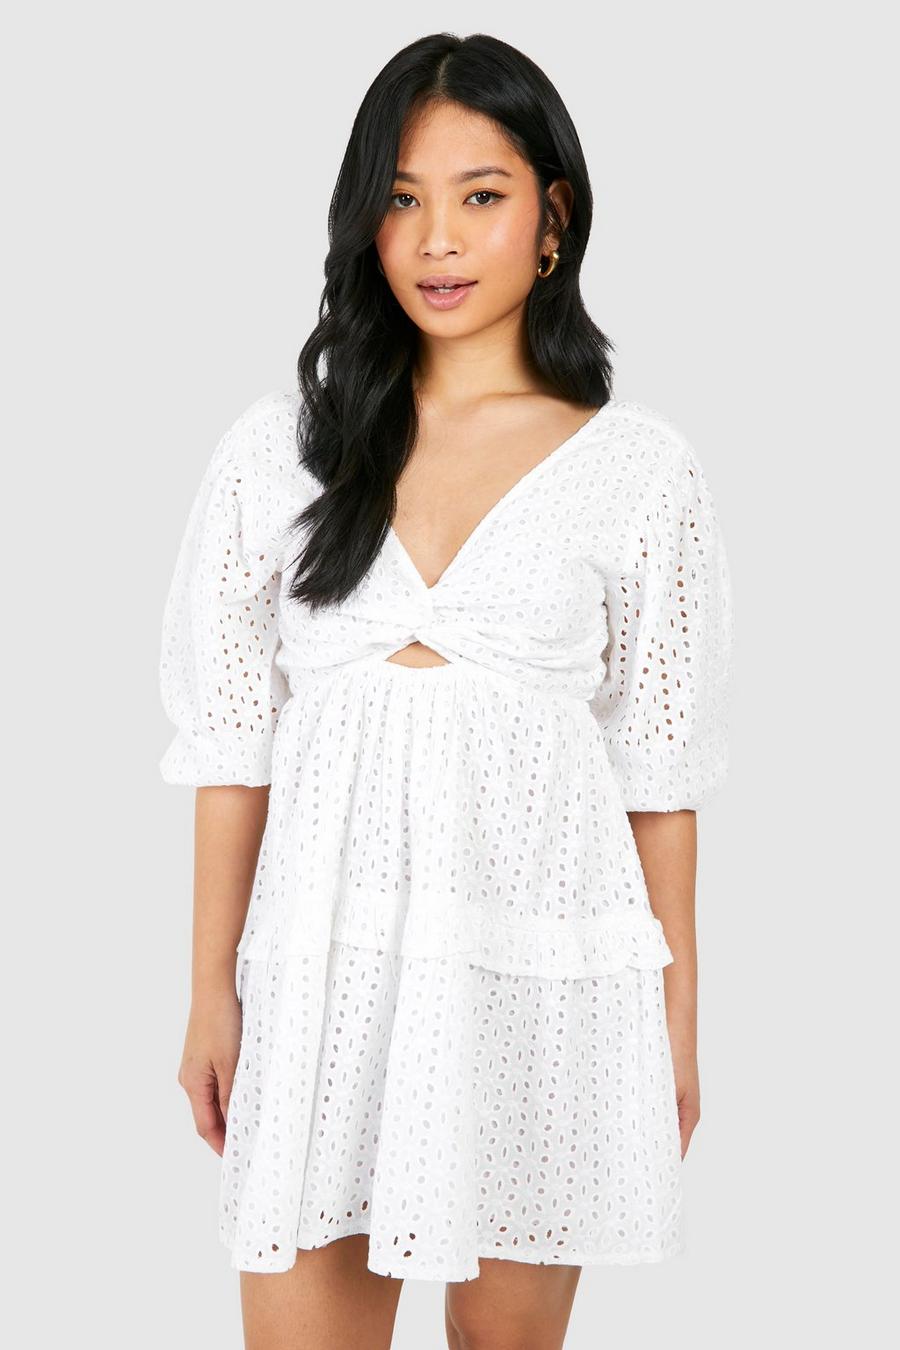 Petite - Robe courte en broderie anglaise à manches bouffantes, White image number 1